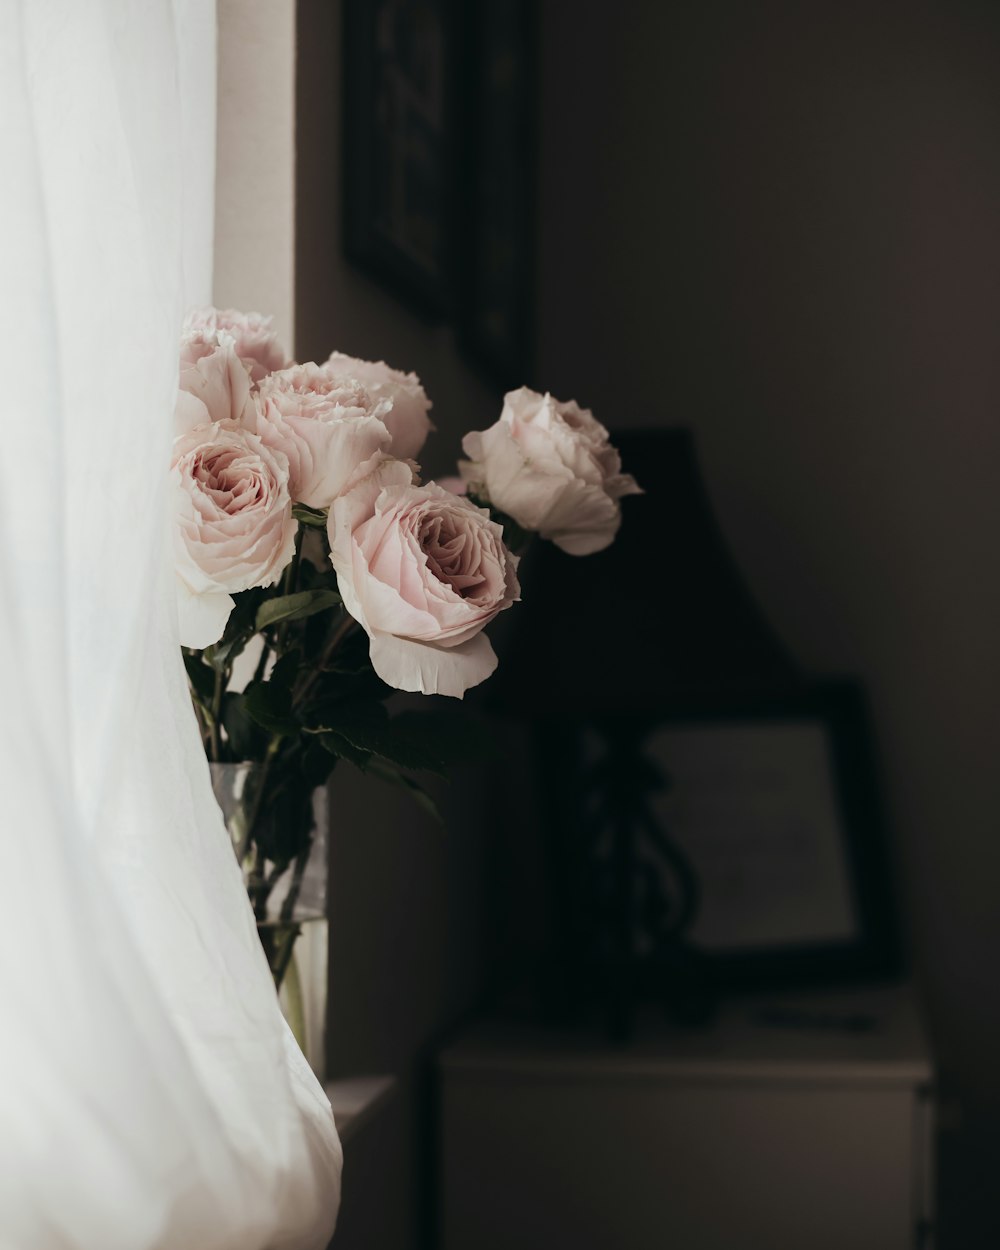 a vase filled with pink roses sitting next to a window